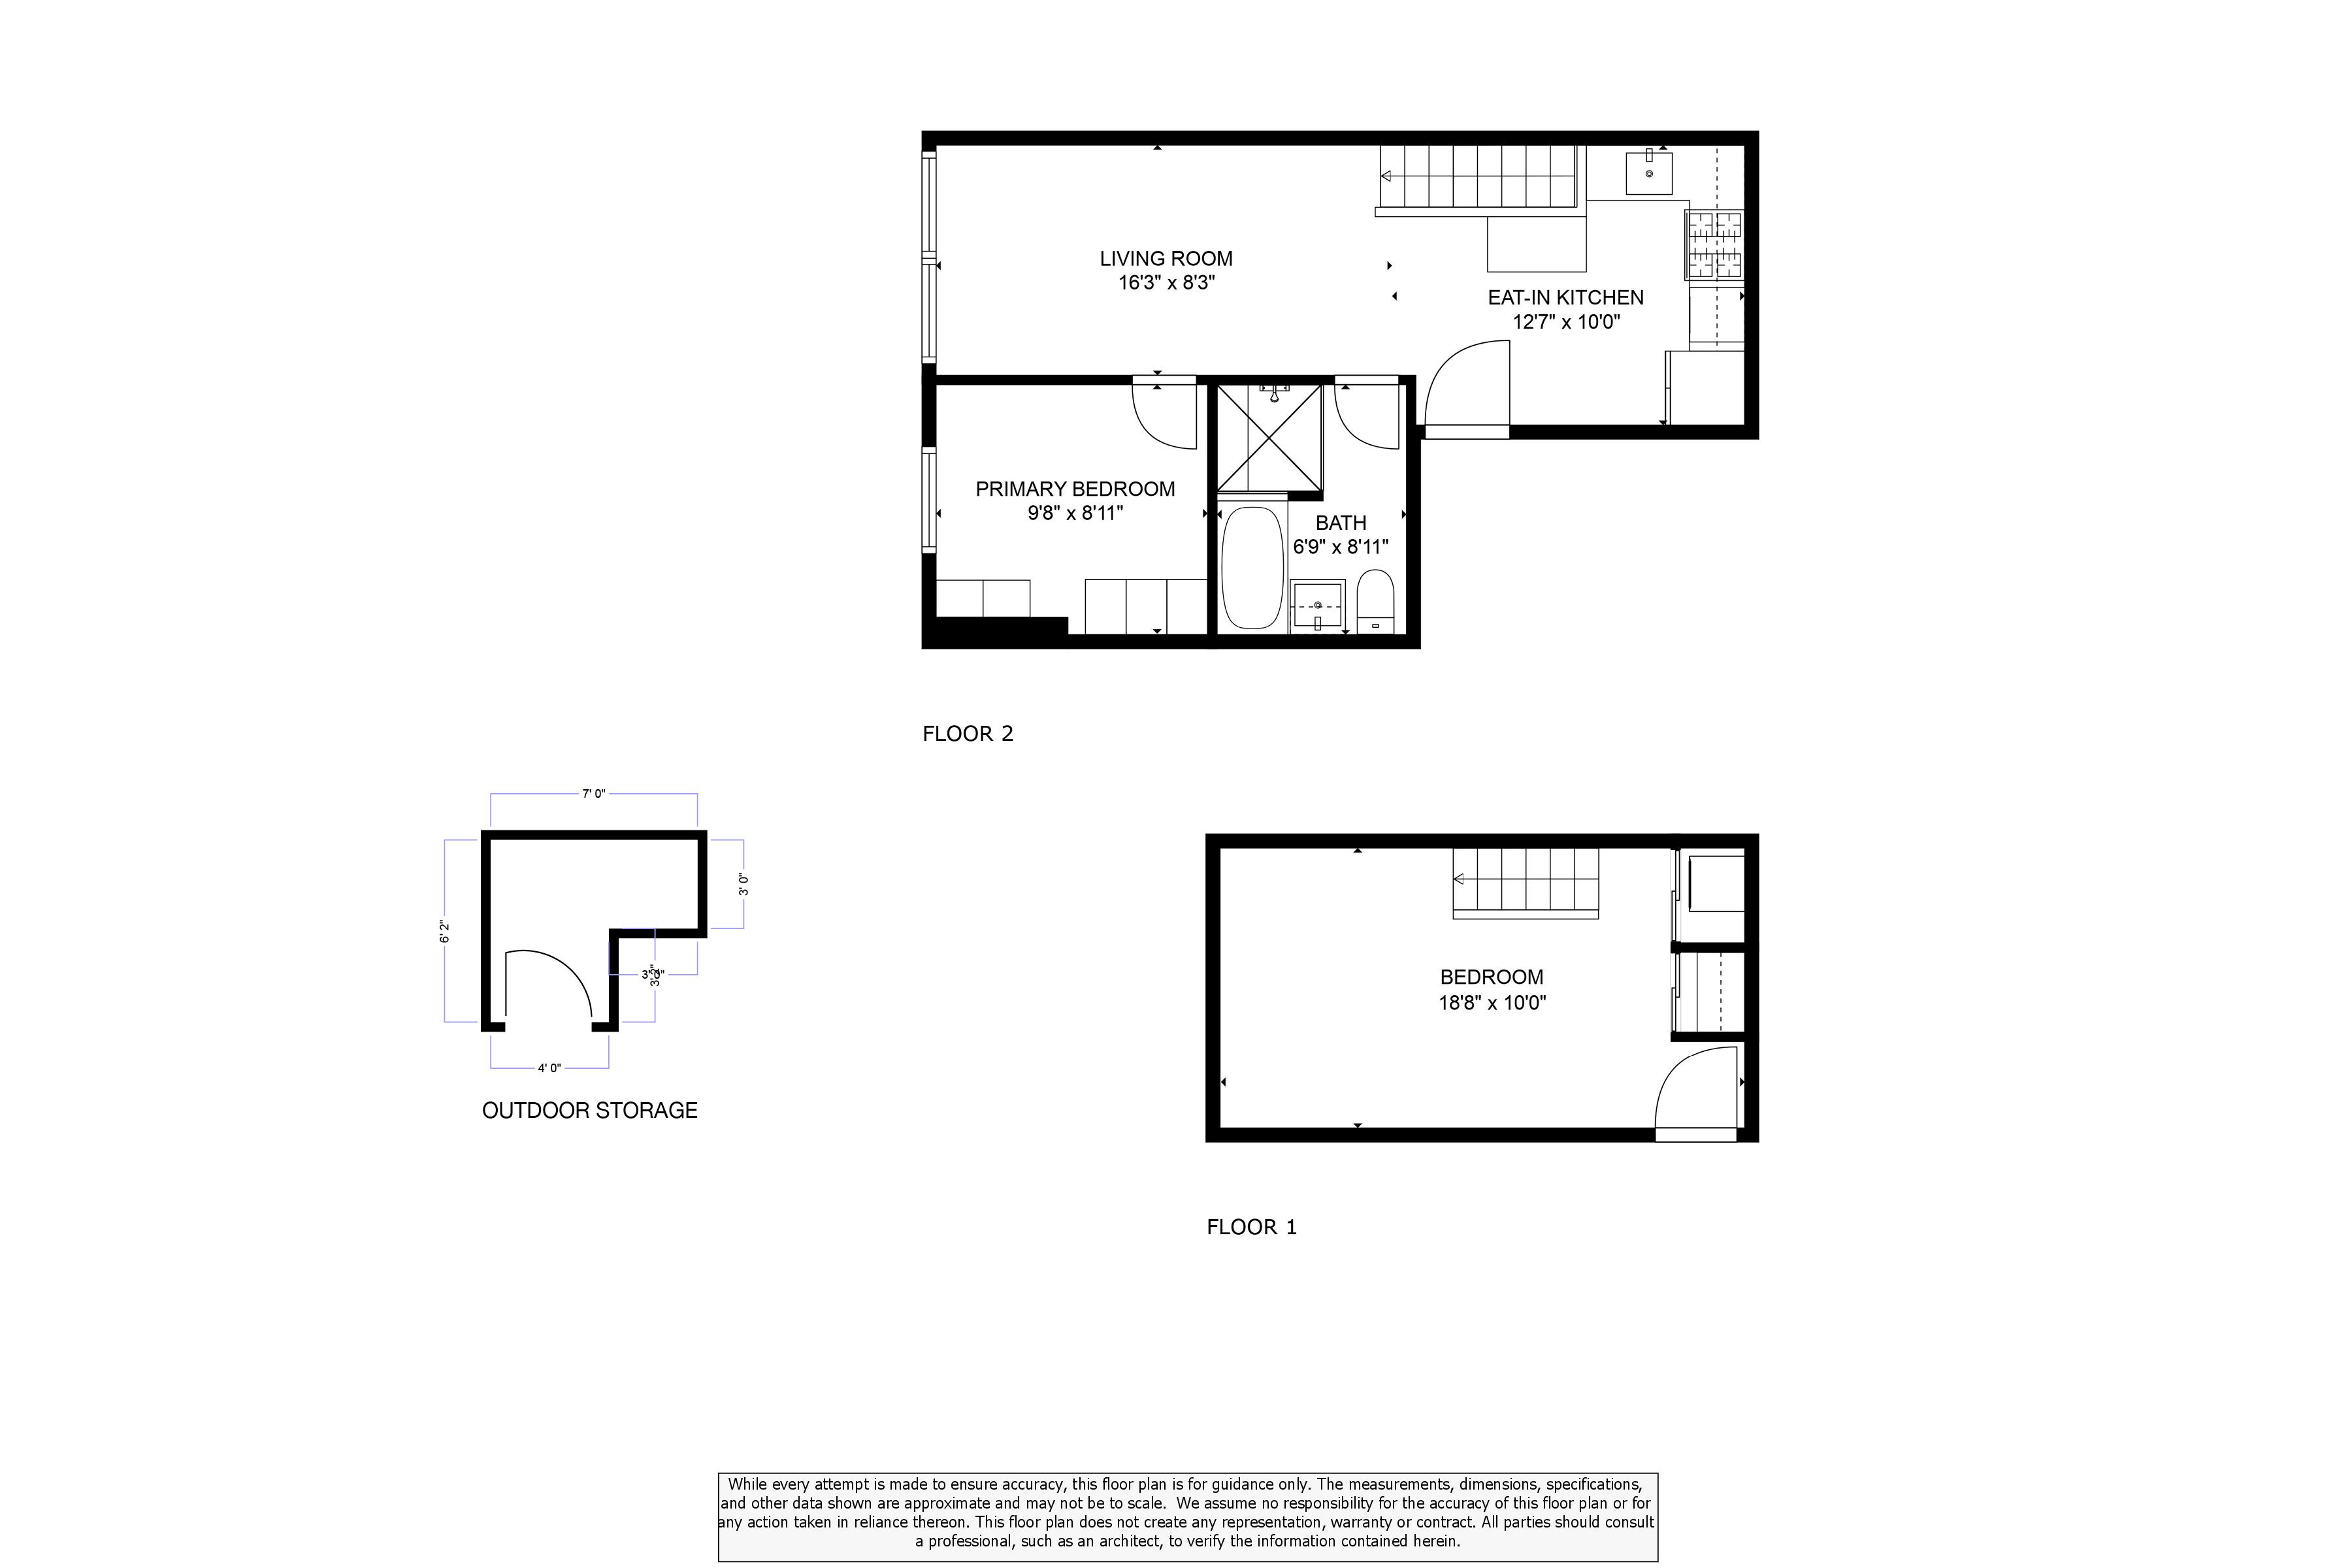 Floorplan for 189 Greenpoint Avenue, 1-A